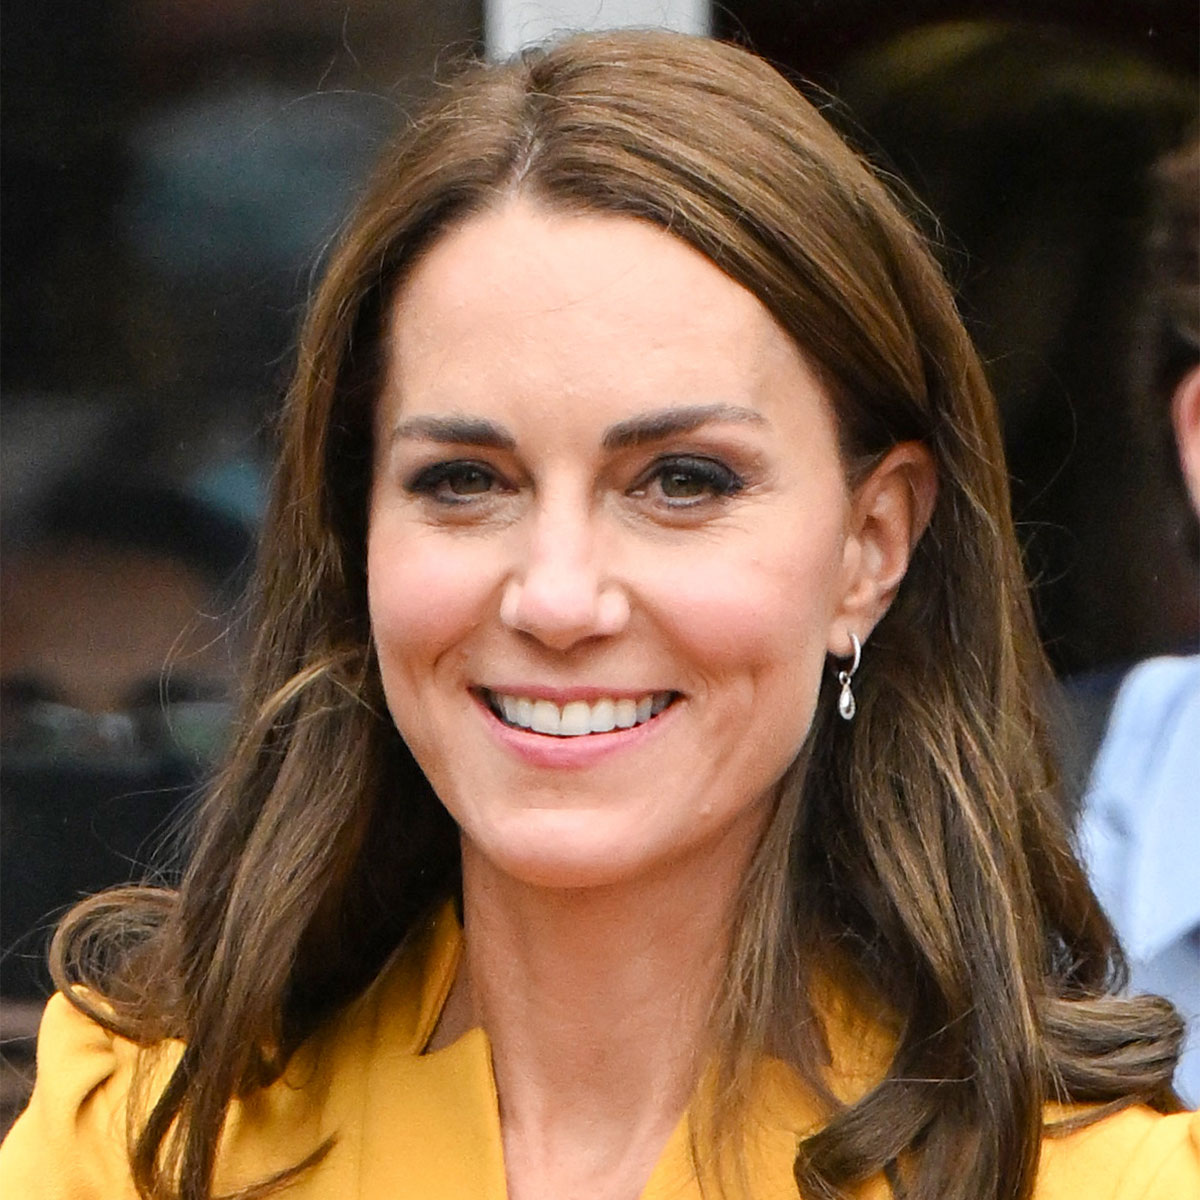 We’re still thinking about the figure-hugging cocktail dress Kate Middleton wore to the coronation reception. Royal blue is definitely her color!